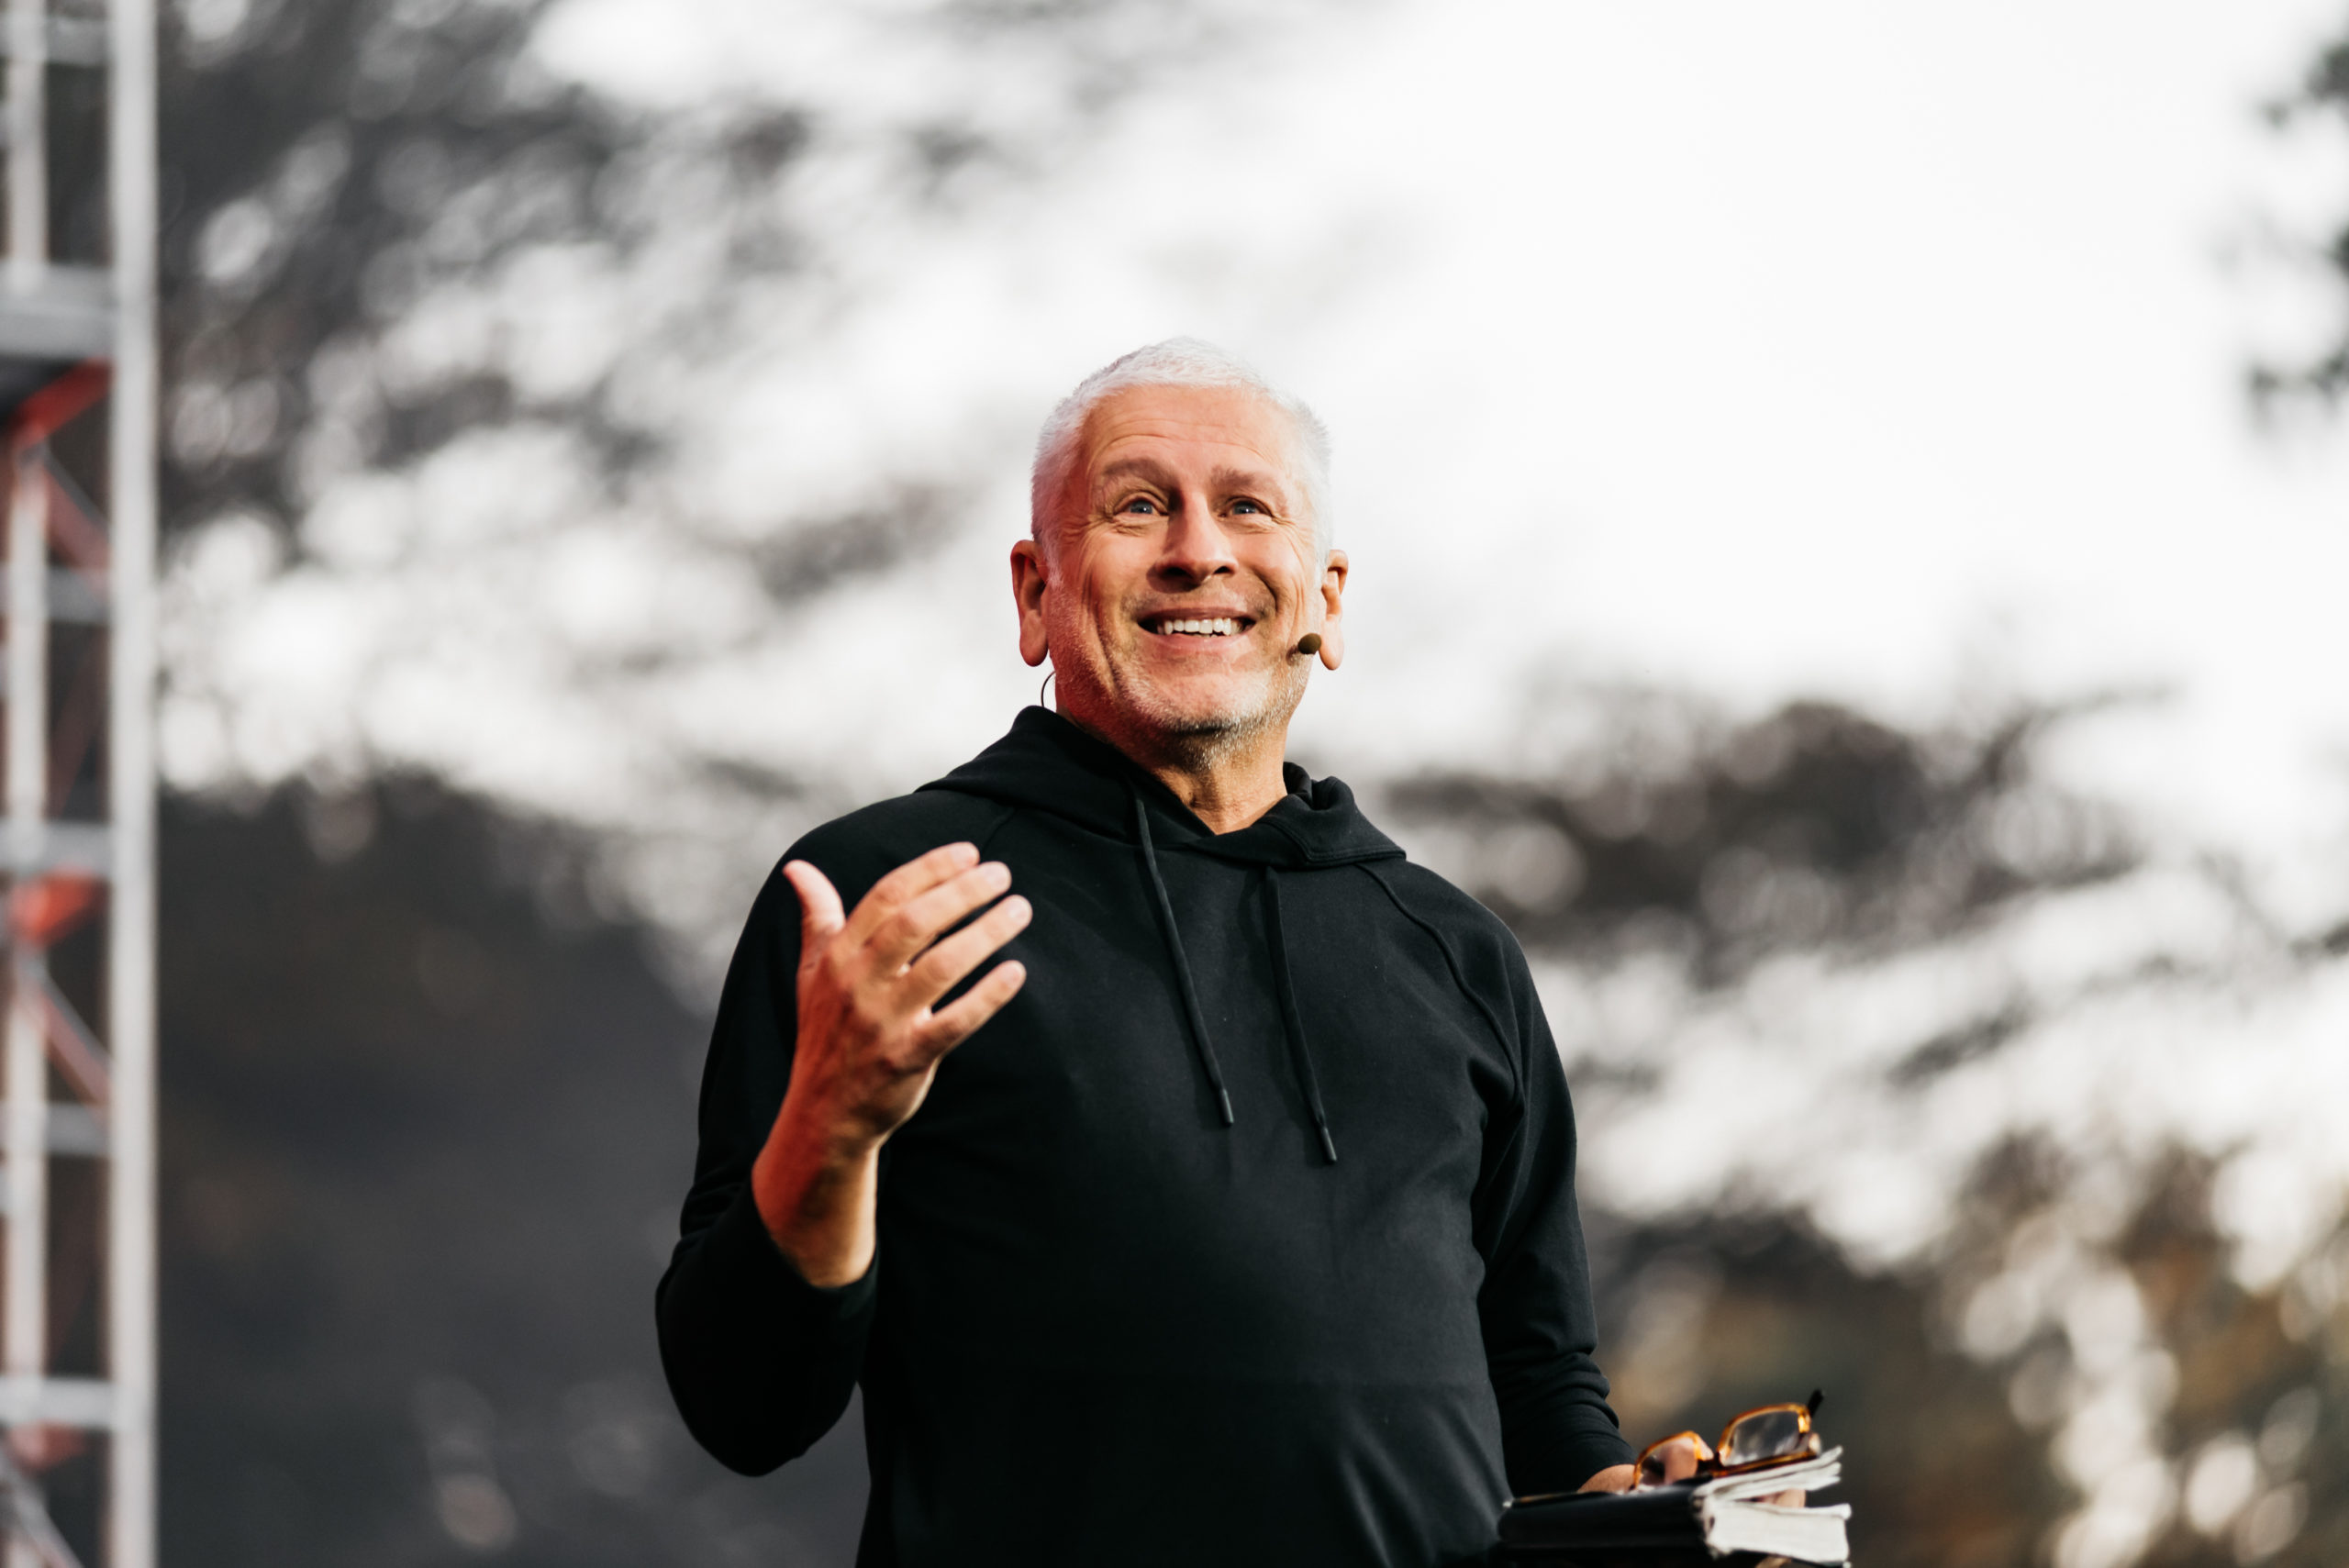 About Louie Giglio